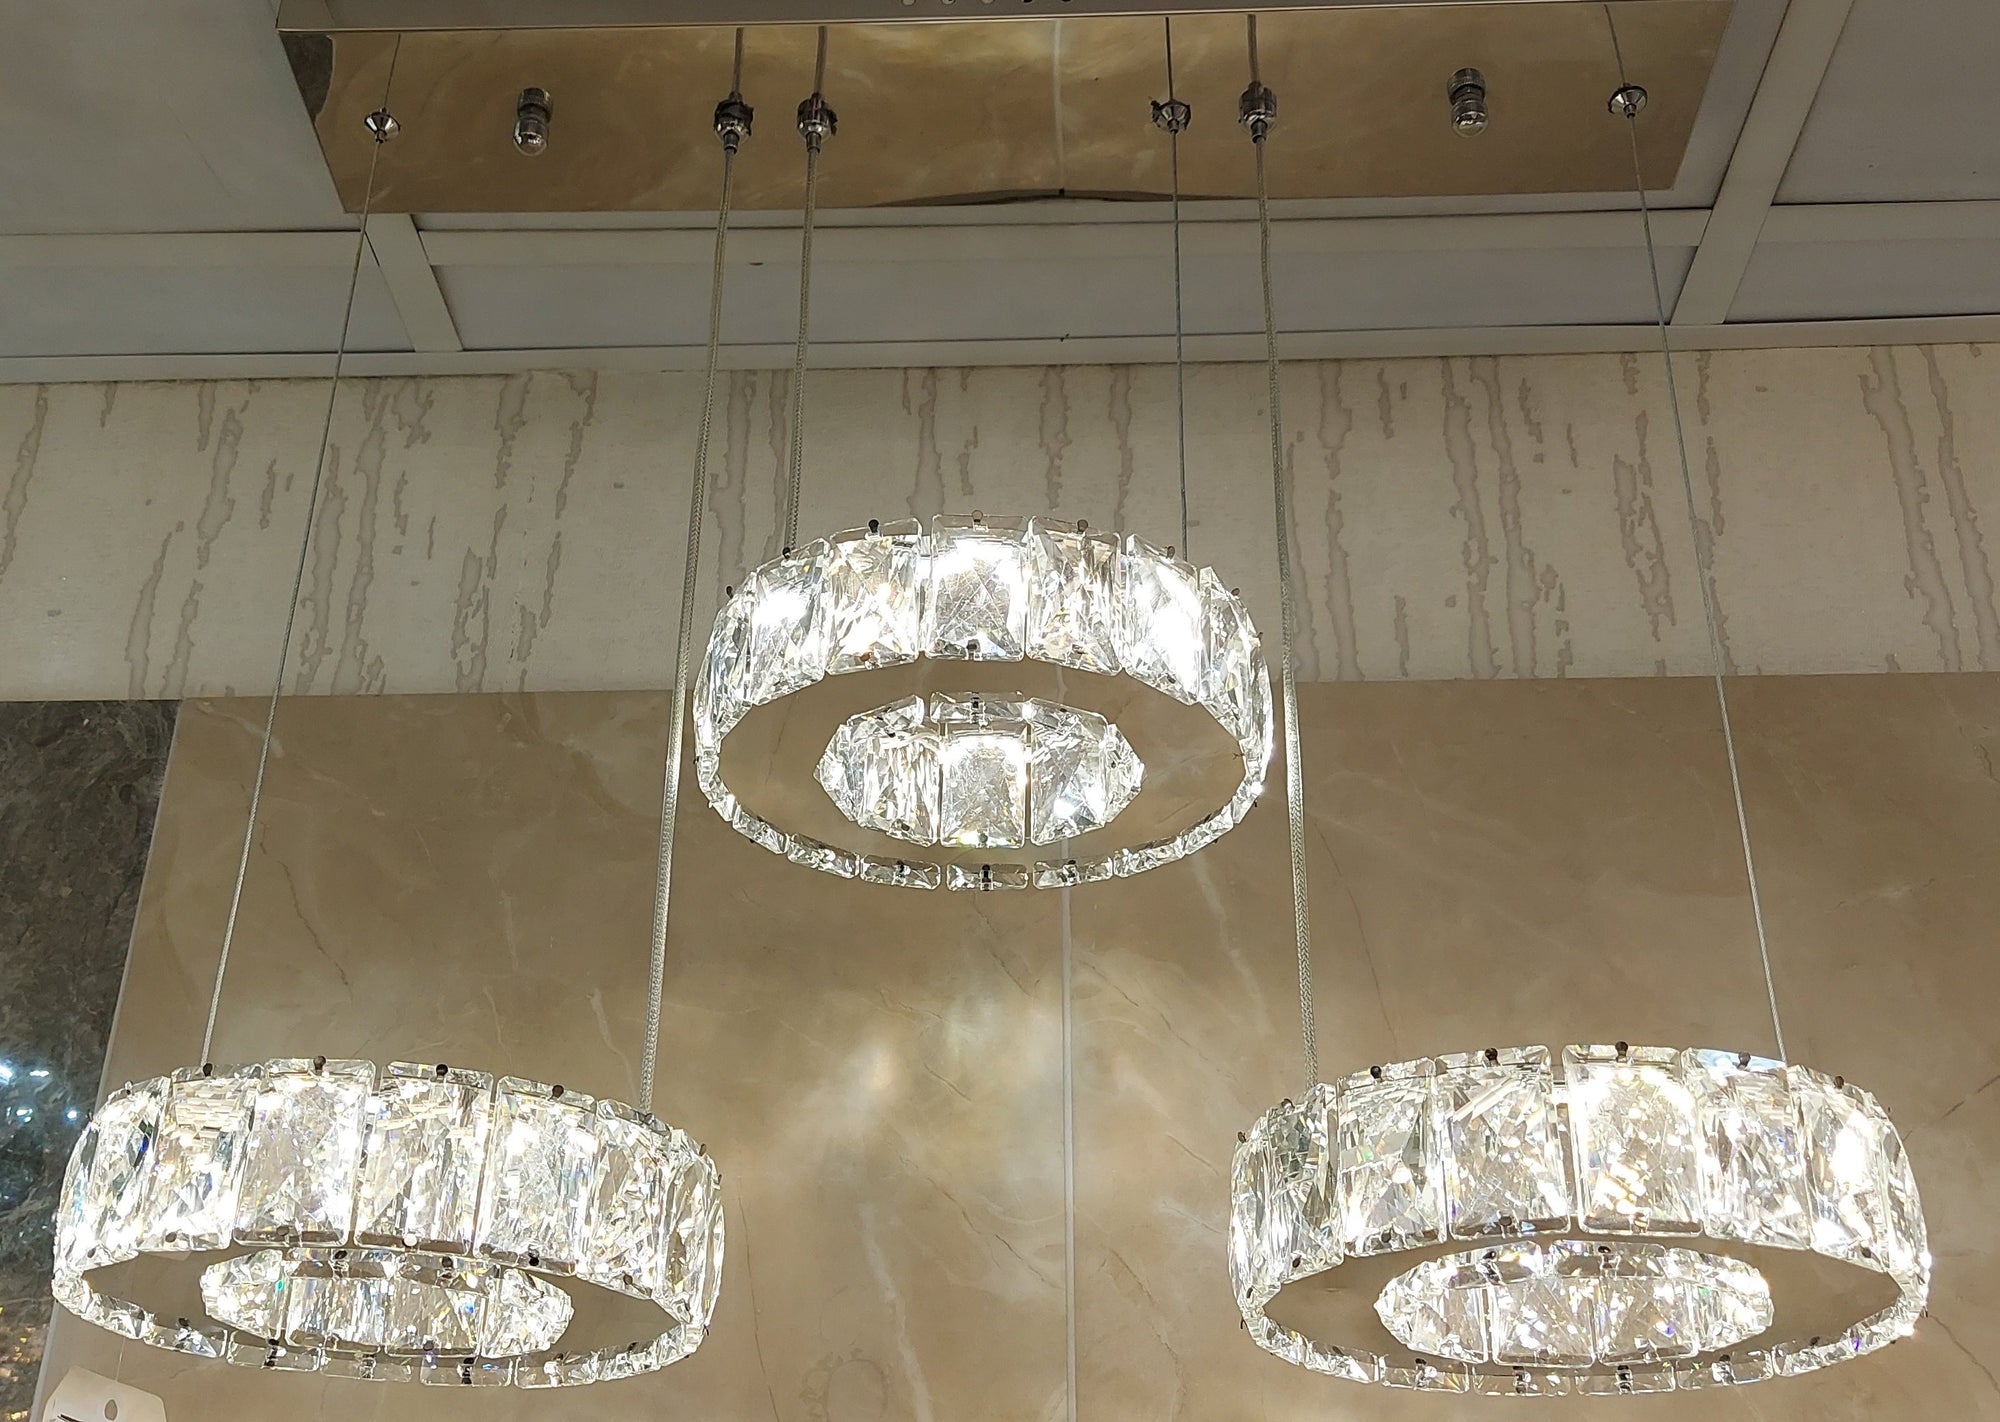 Diamante Crystallic 3 x Round Fixture mirrored frame colour changing LED ceiling light [9010-3)